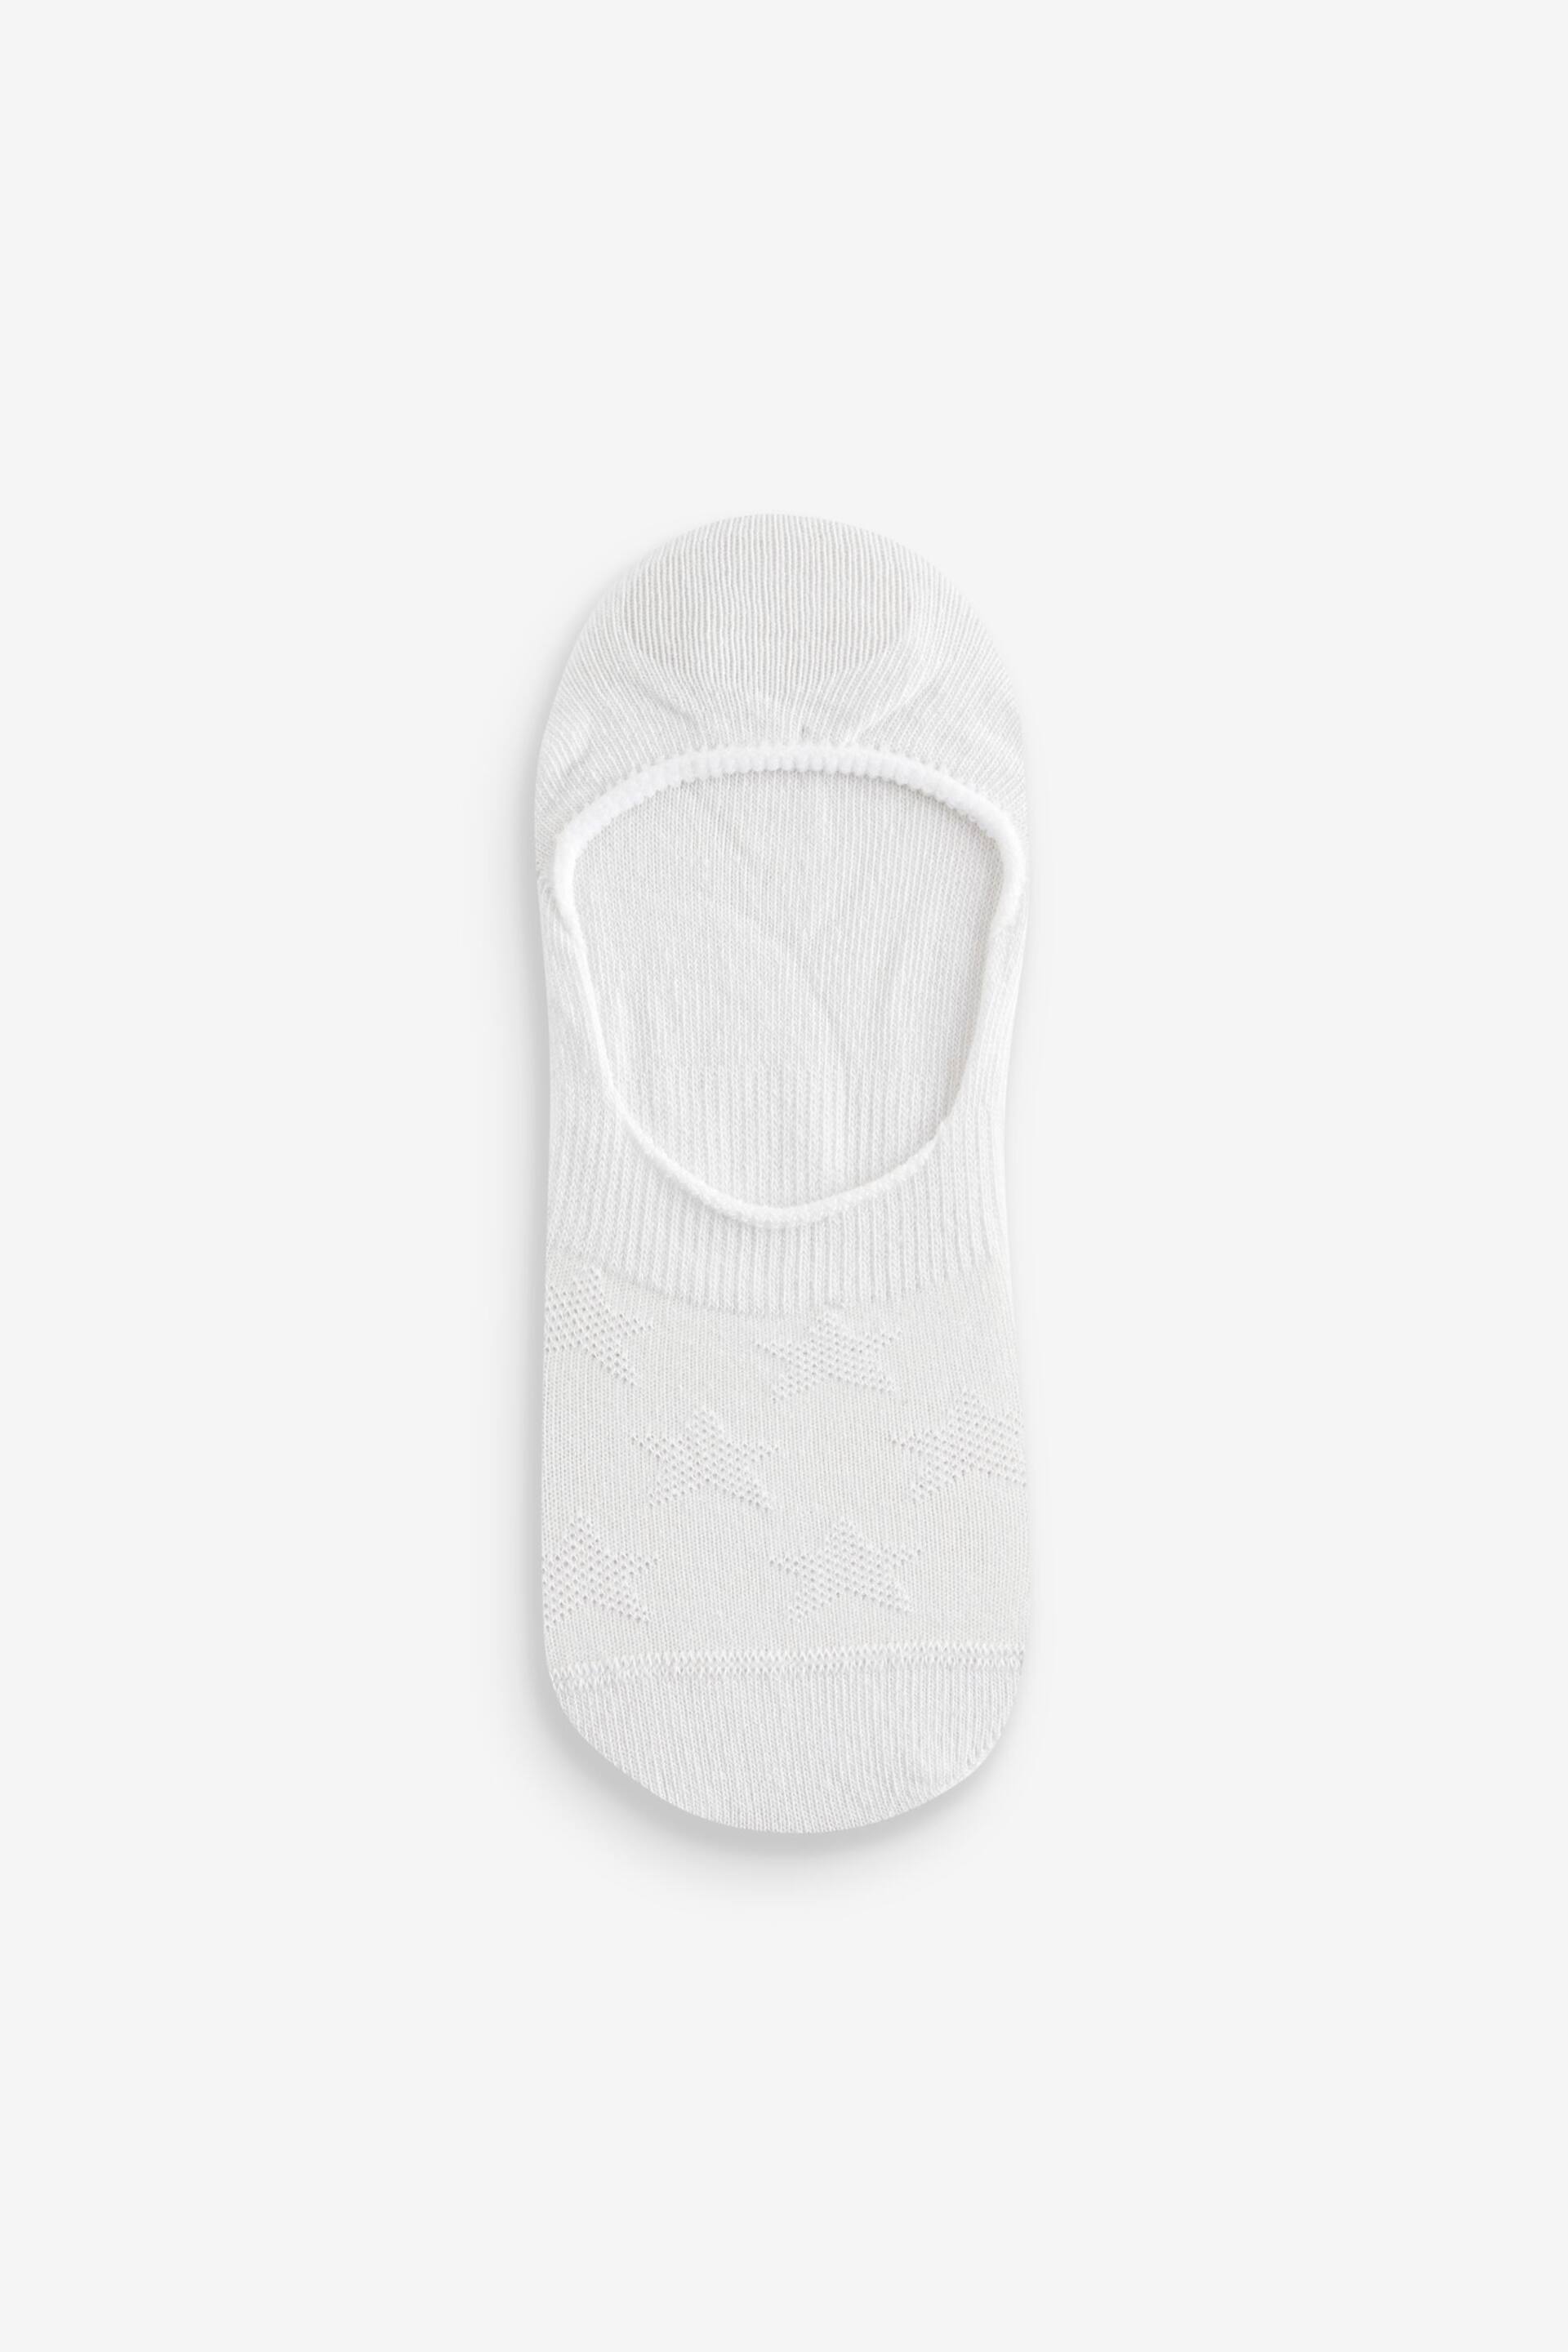 White Heart/Star Textured Low Cut Invsible Trainer Socks 4 Pack - Image 3 of 5